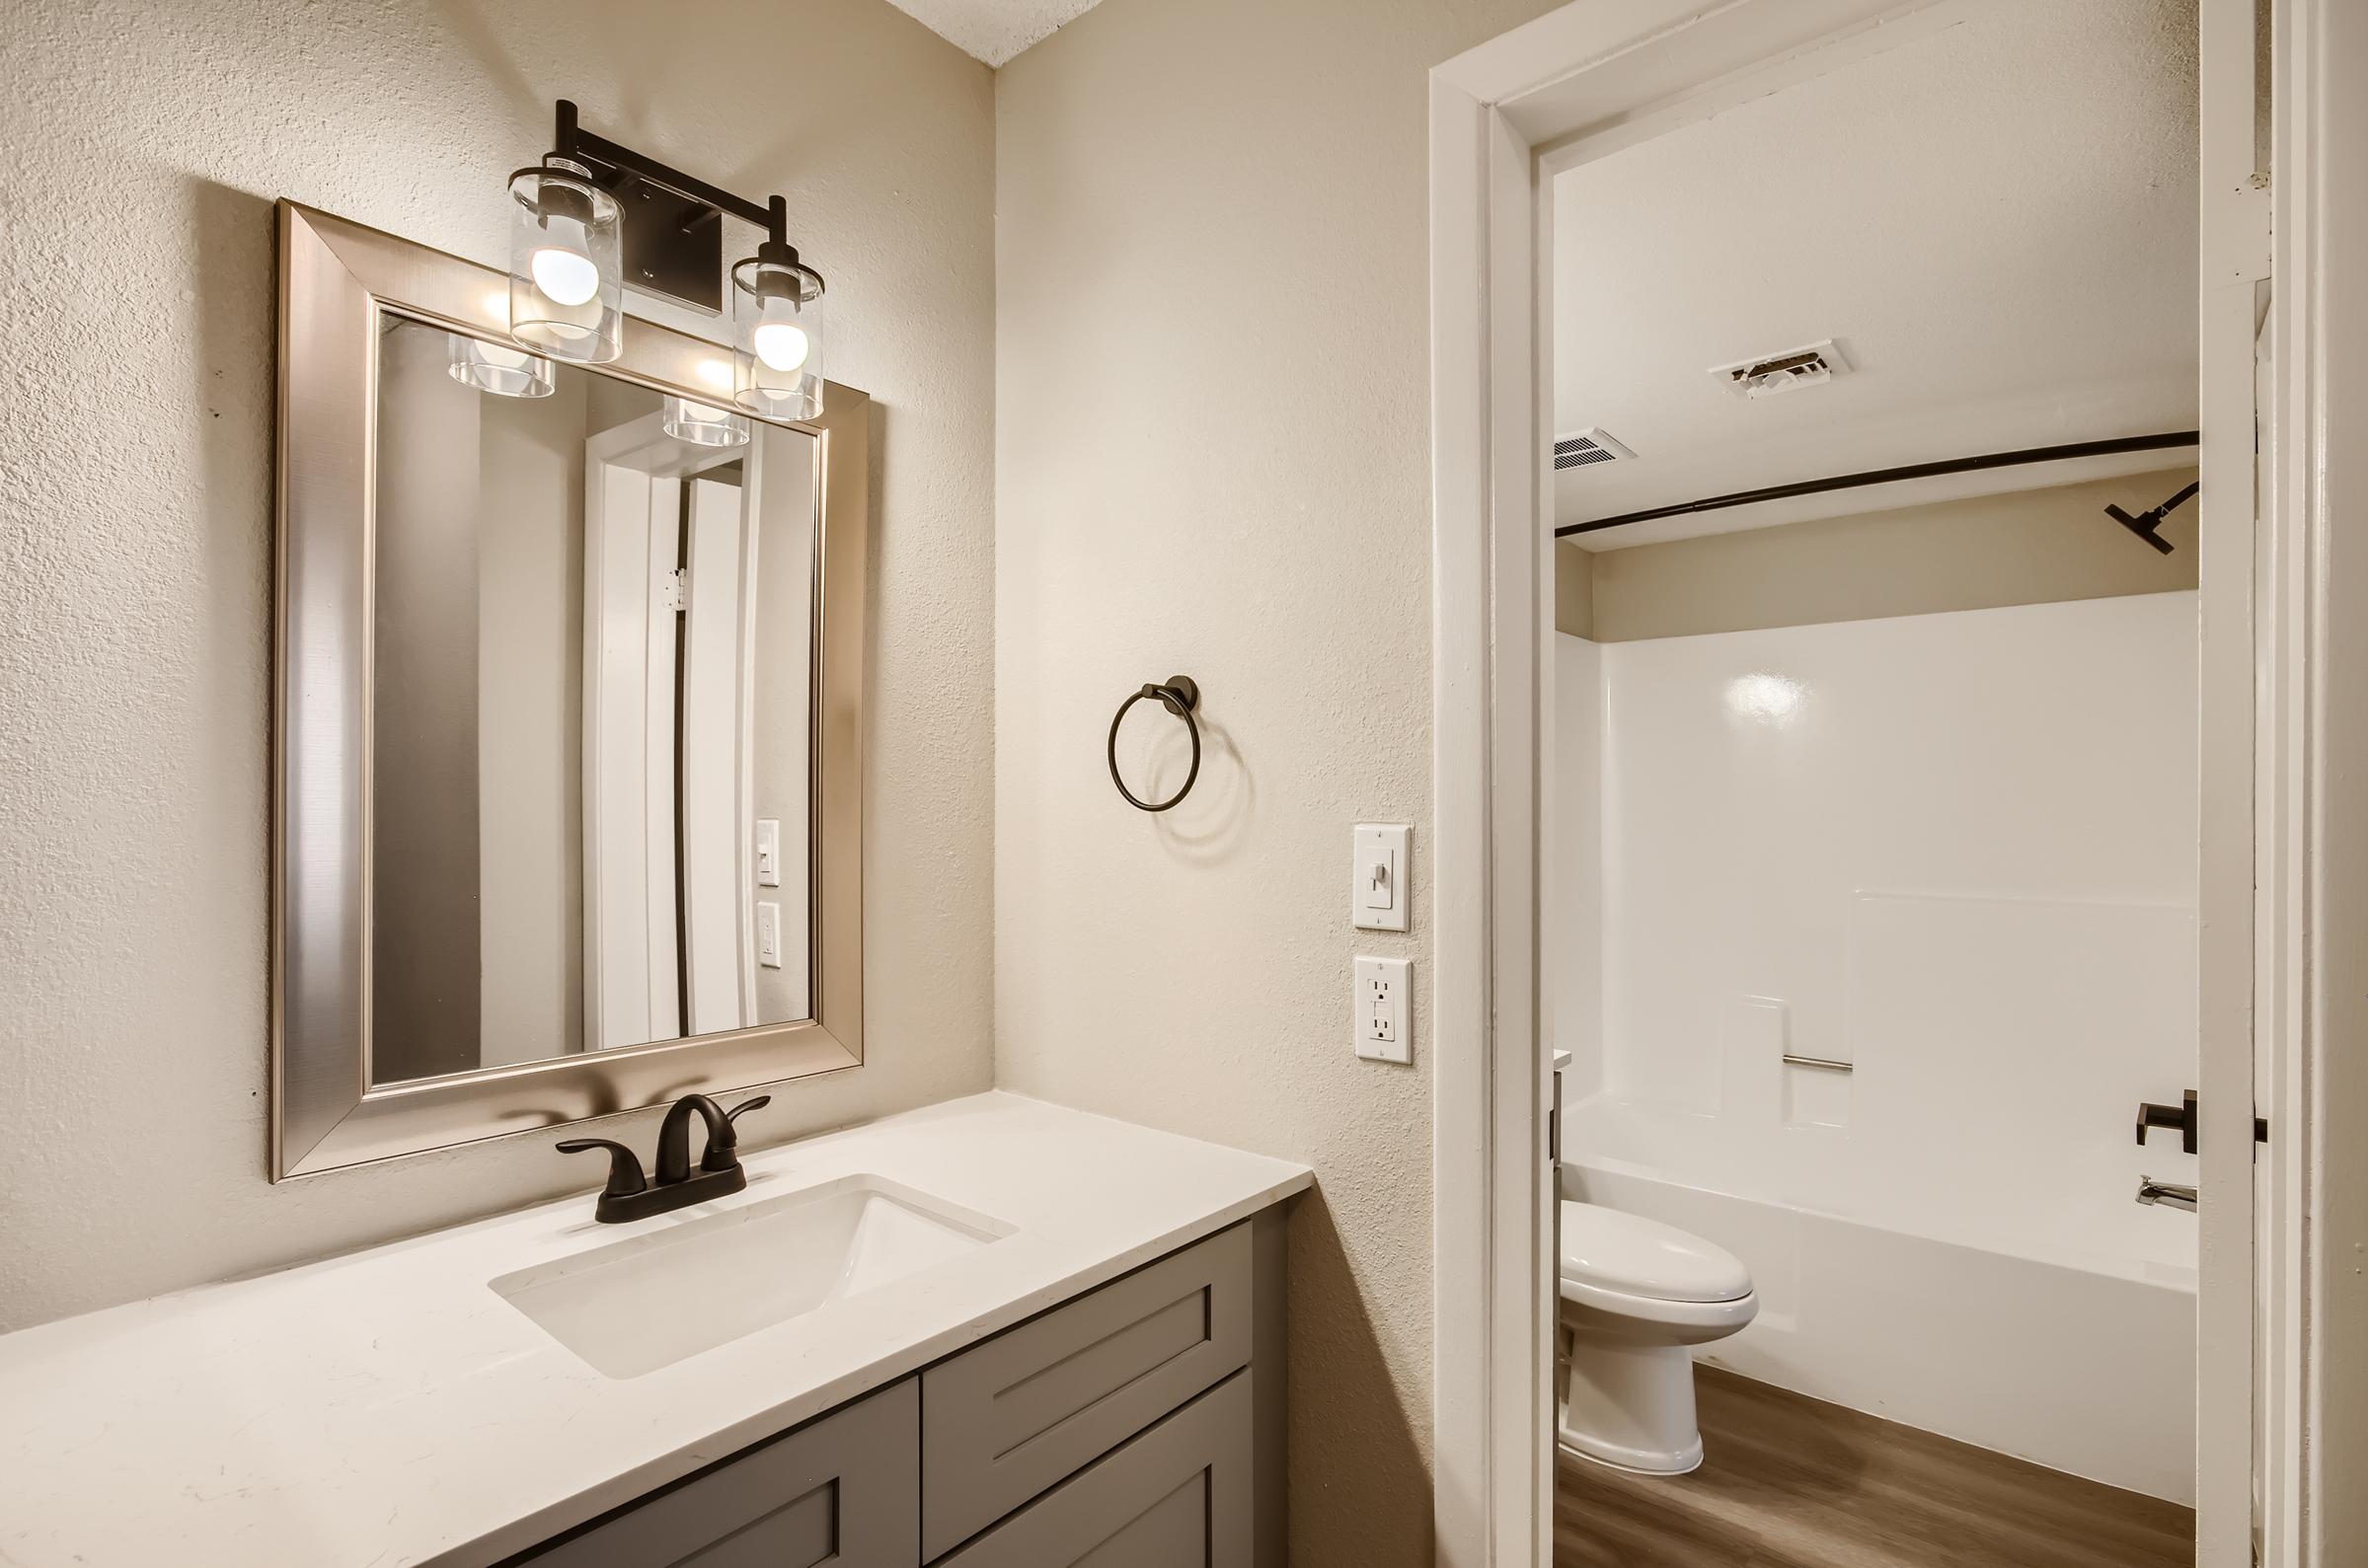 An apartment bathroom with a separate toilet area at Rise on McClintock.